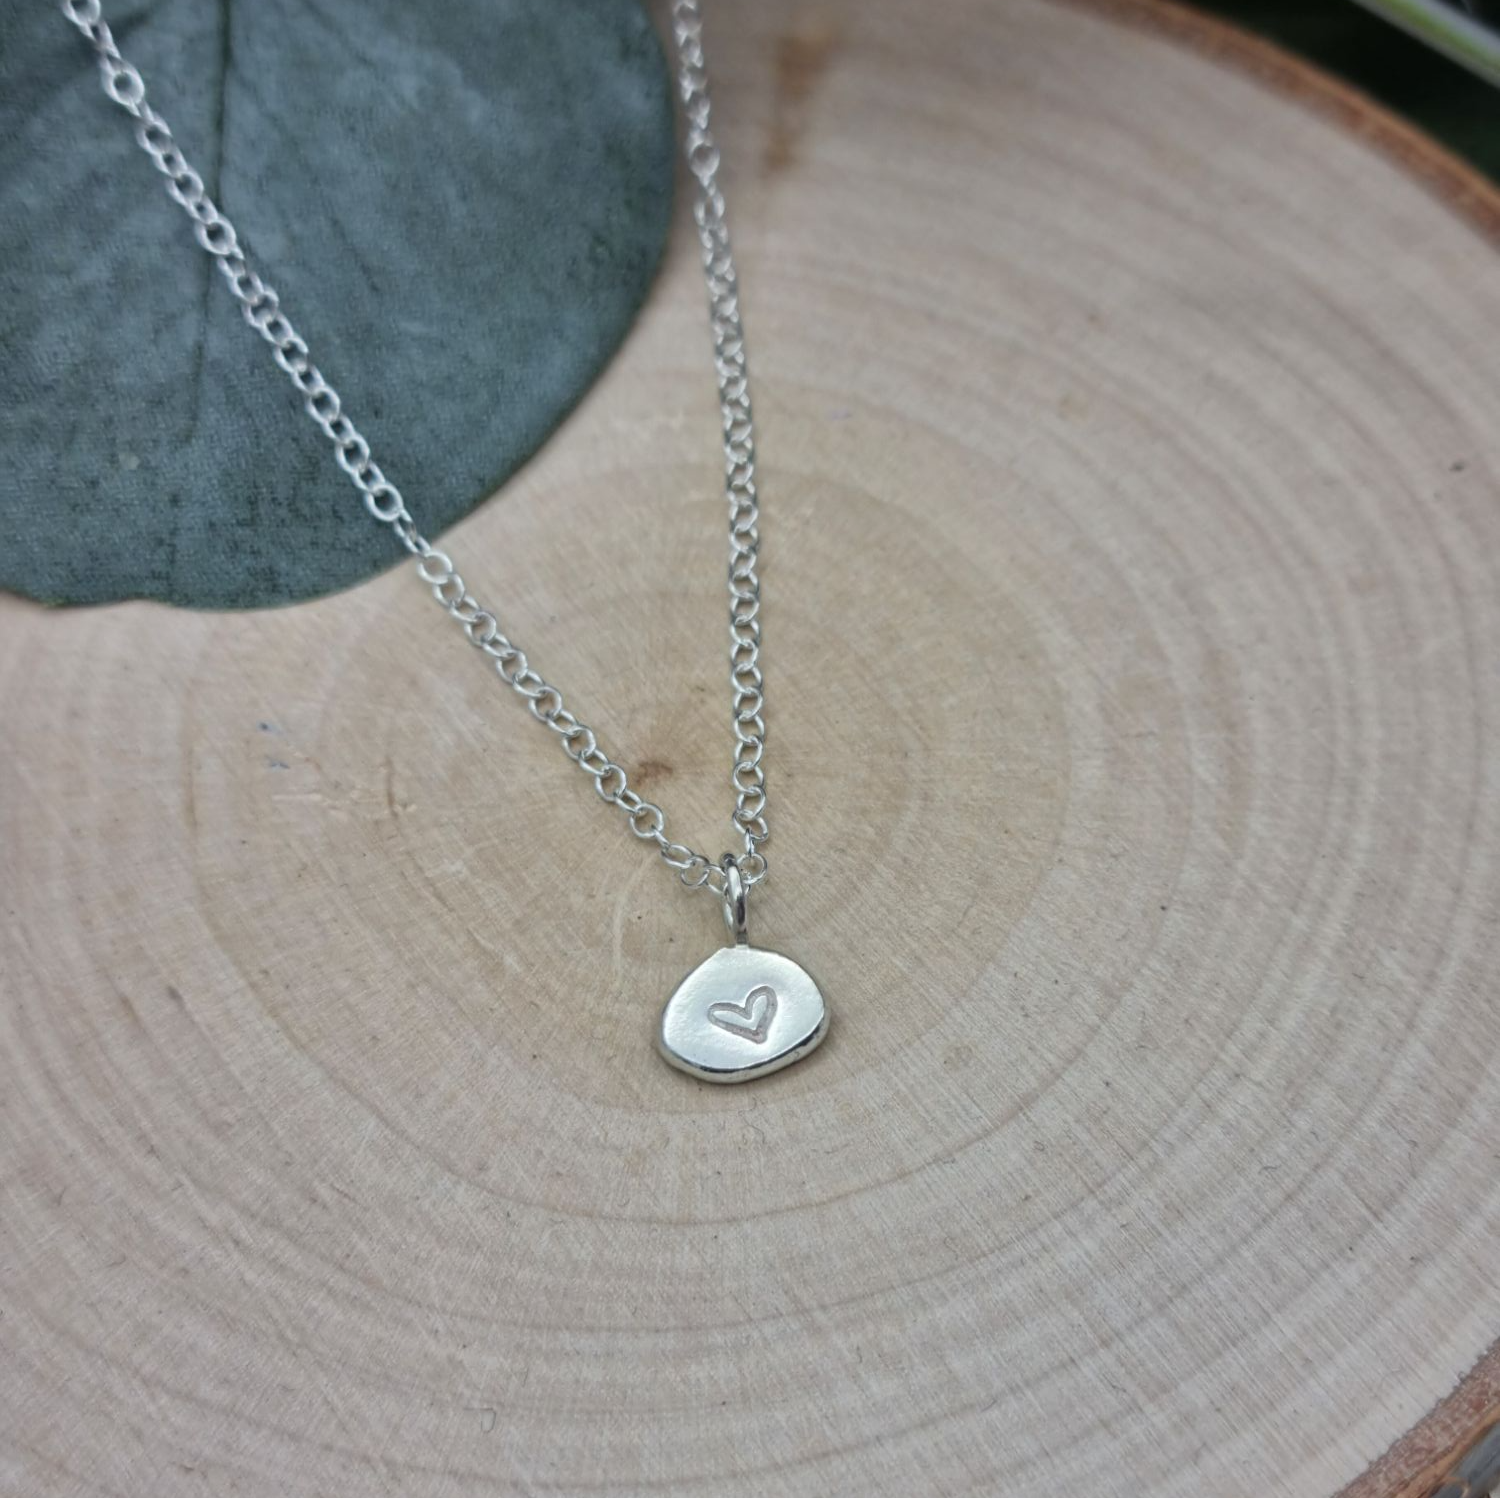 Pebble Love Necklace, handmade from recycled sterling silver and handstamped